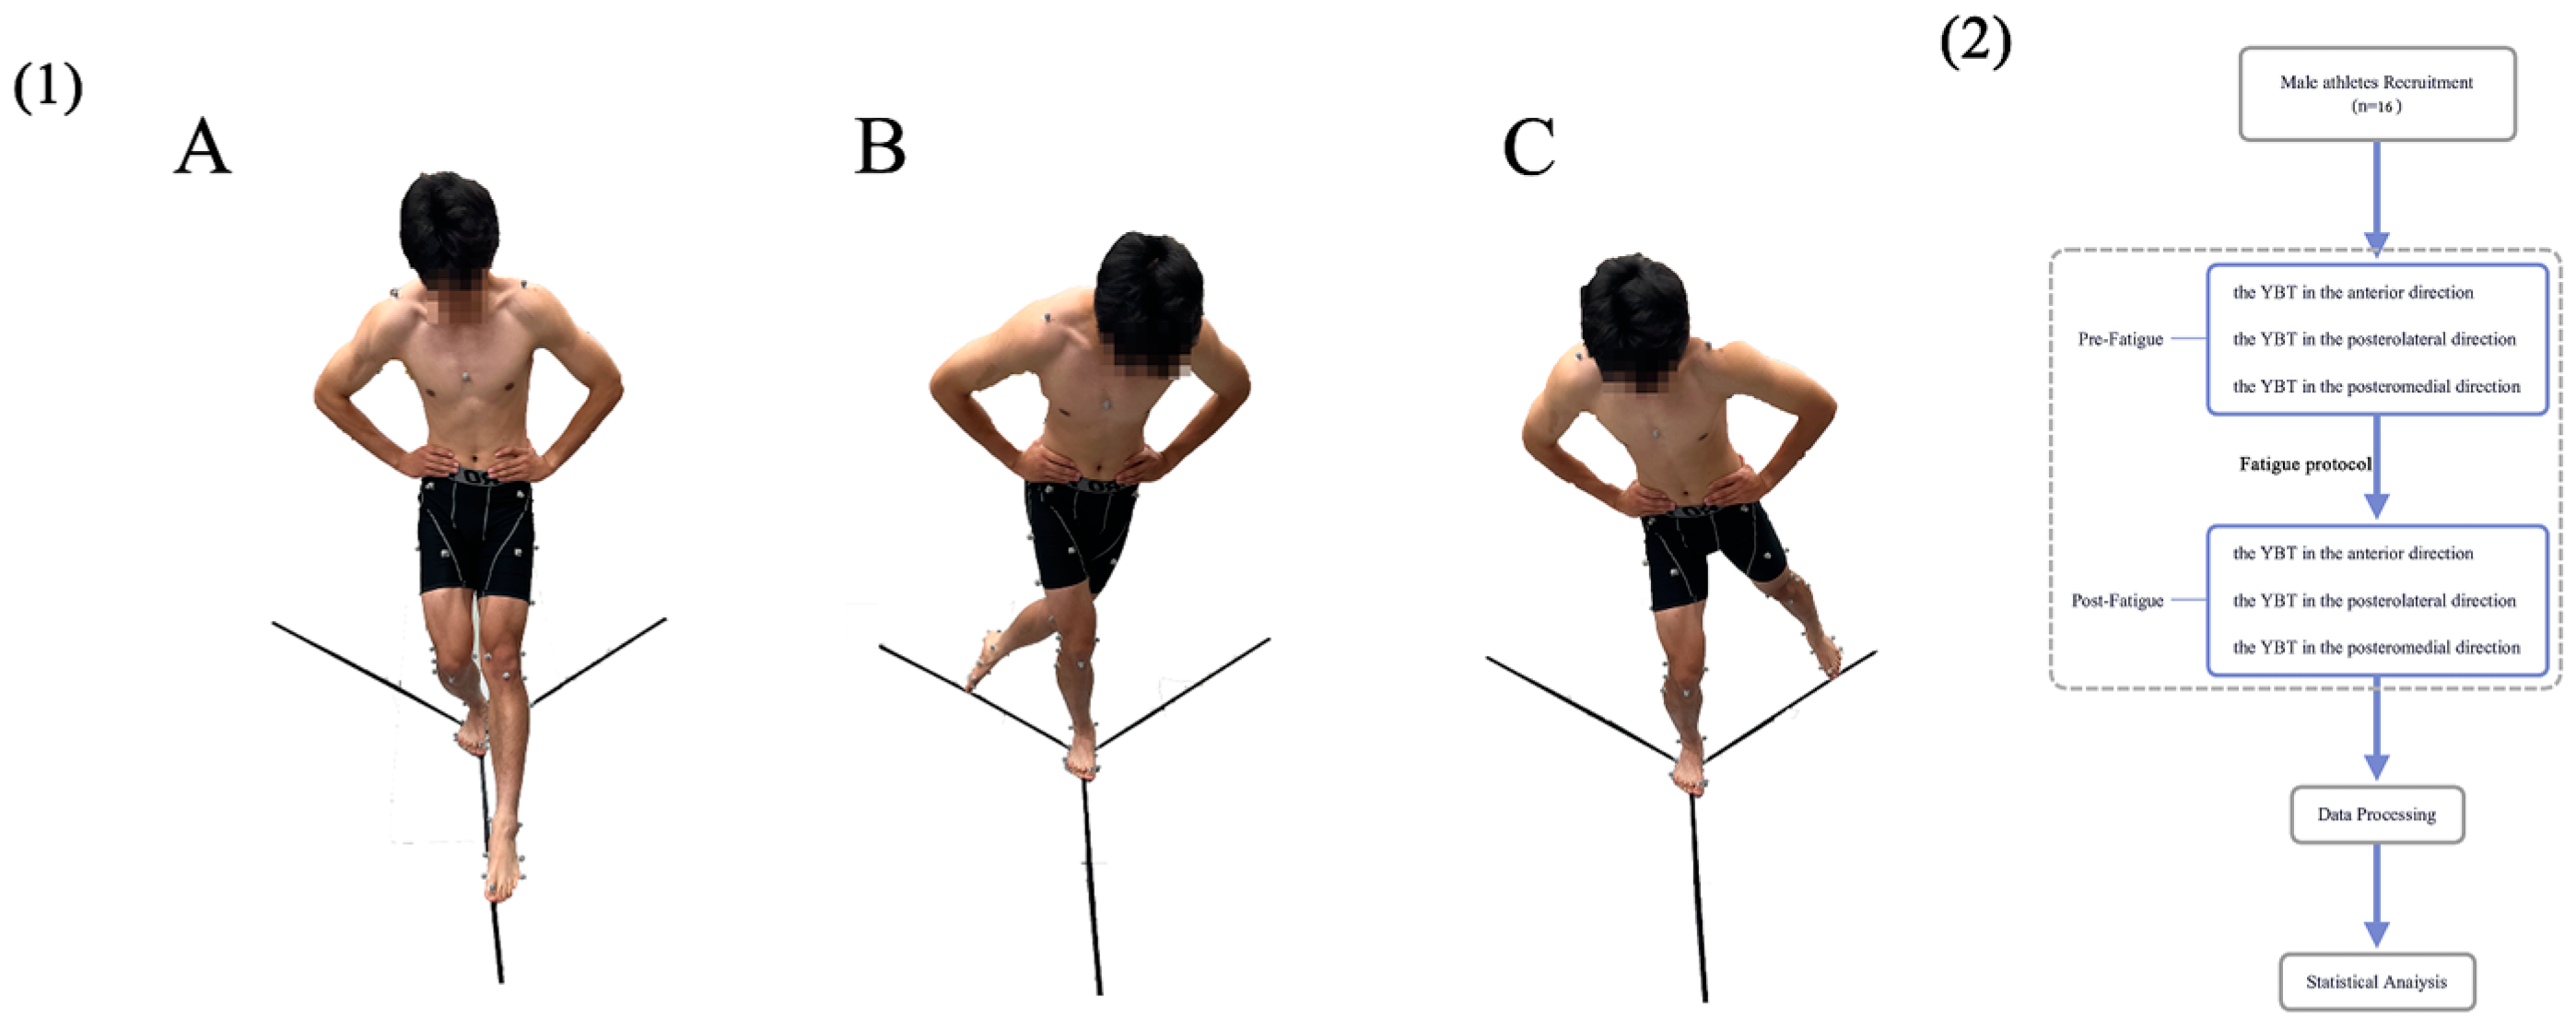 Questions on levels of fatigue in the lower back, posterior legs